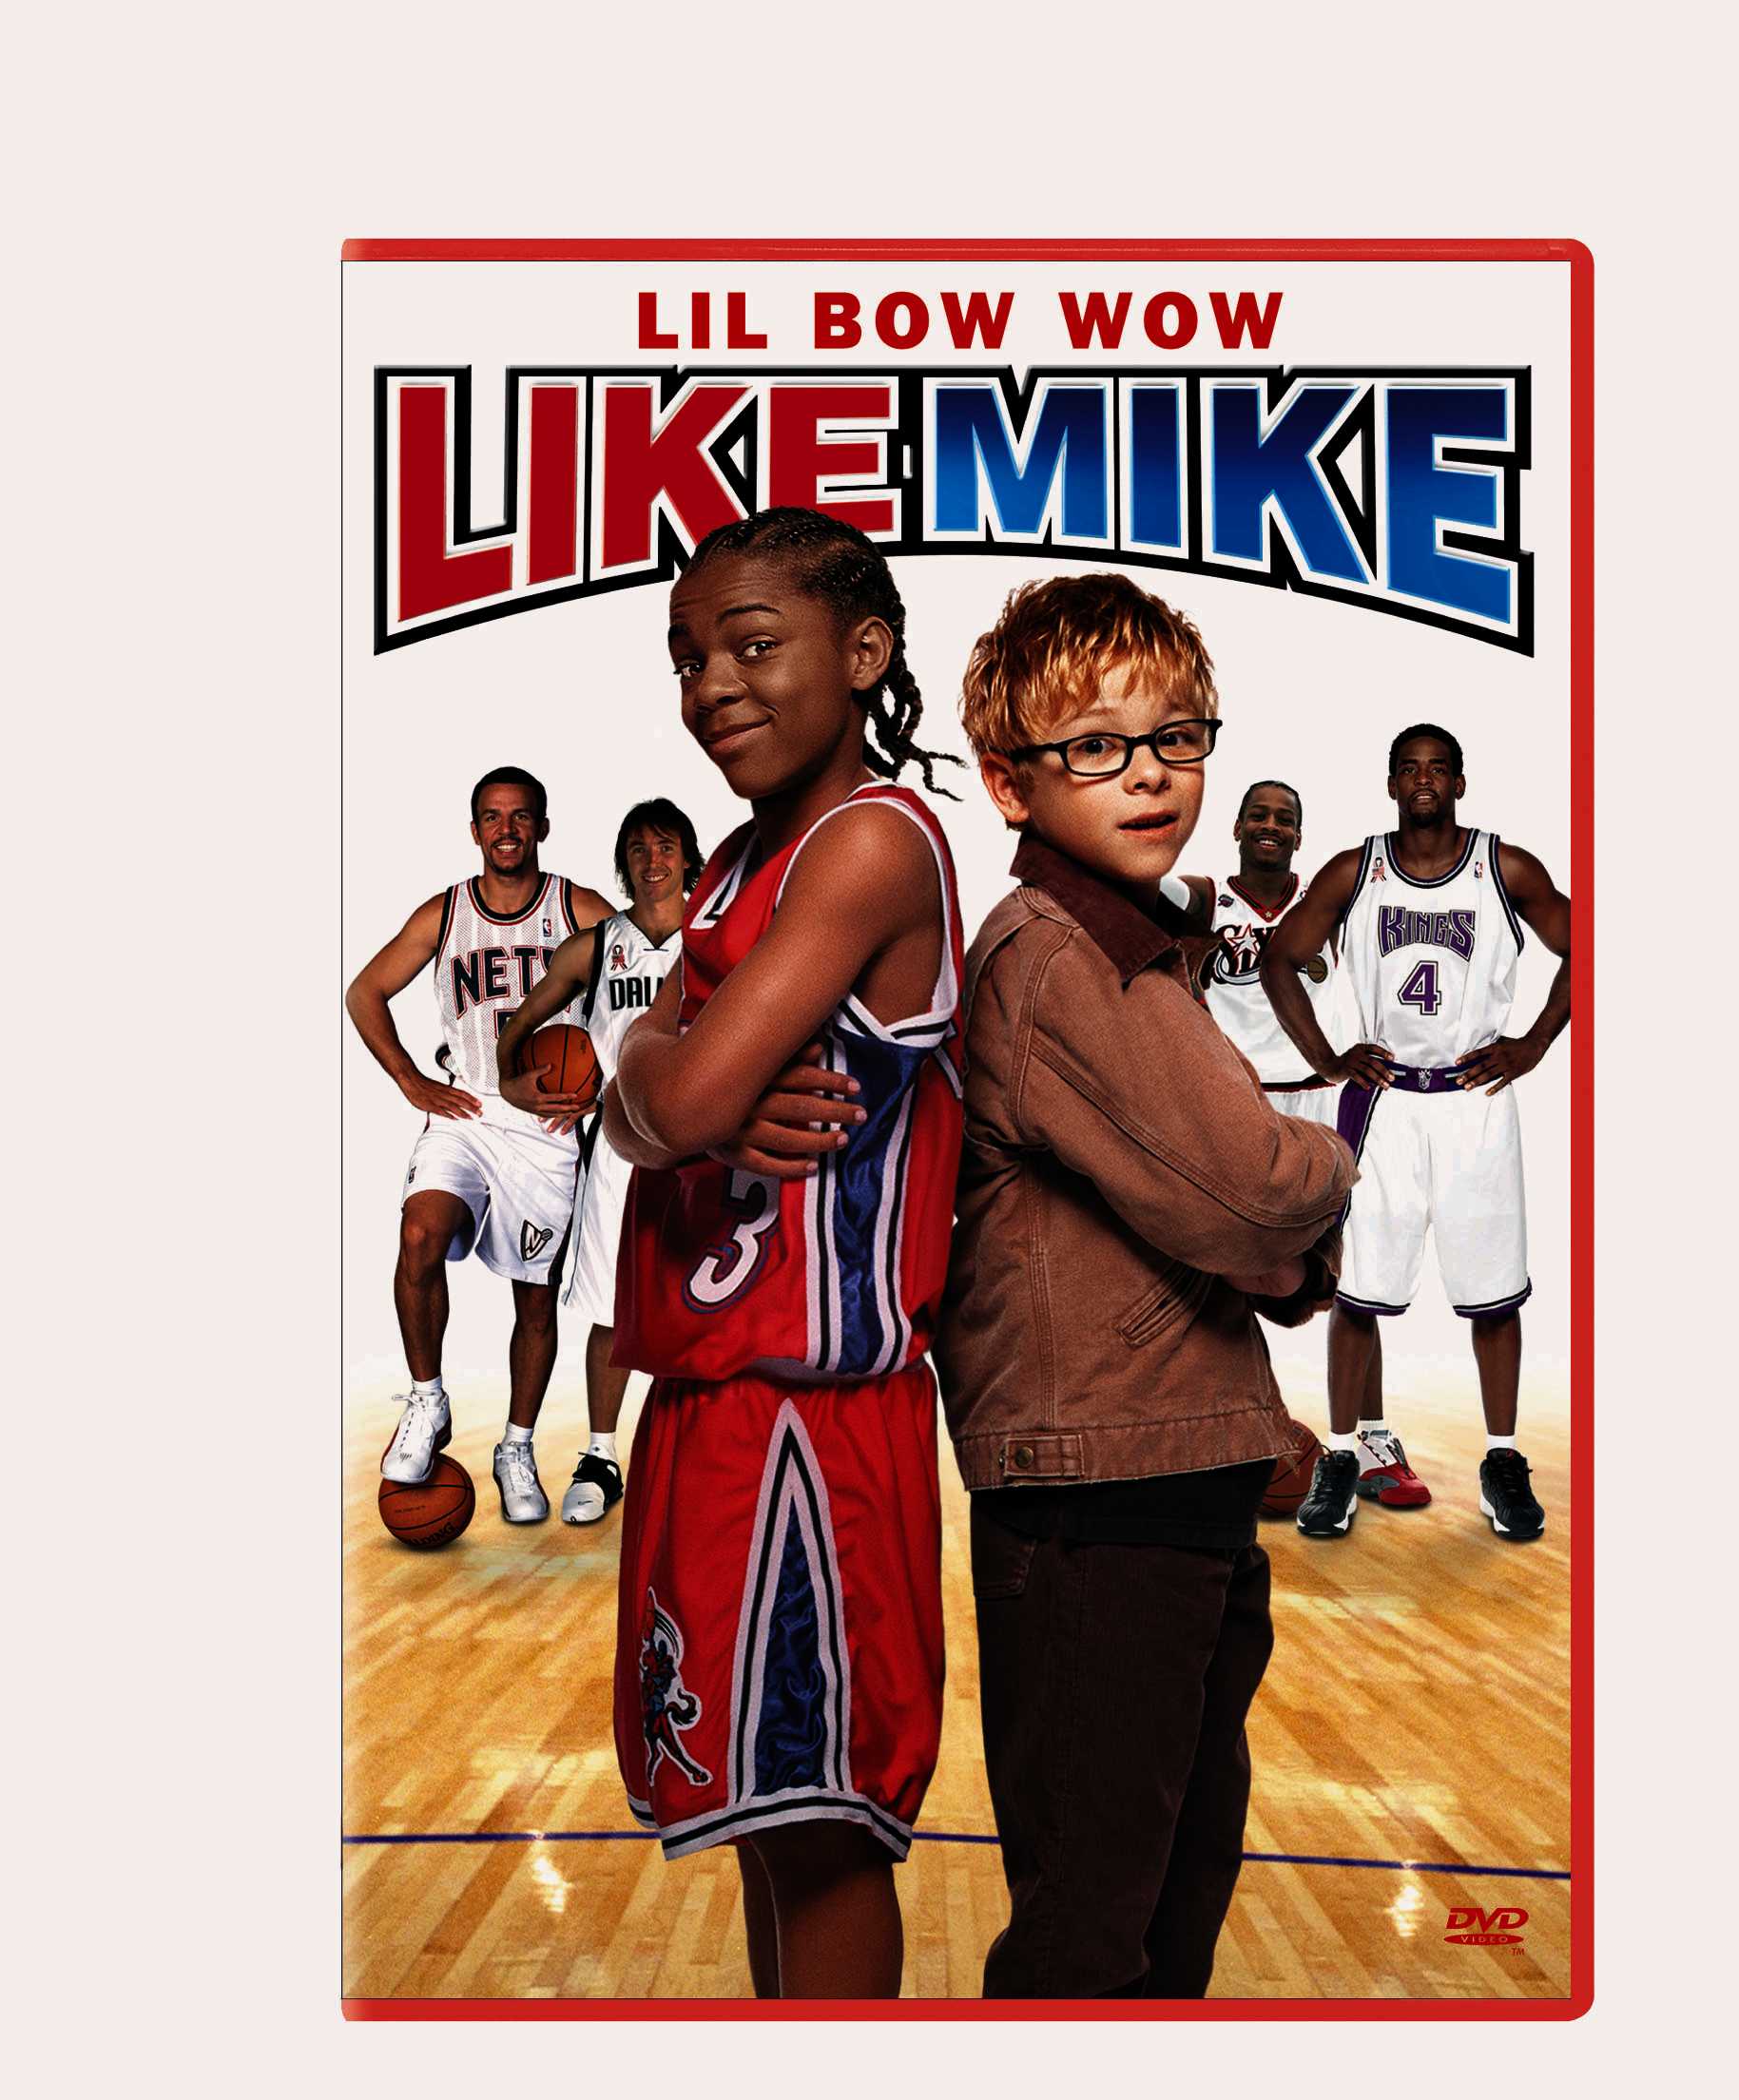 like mike lil bow wow song